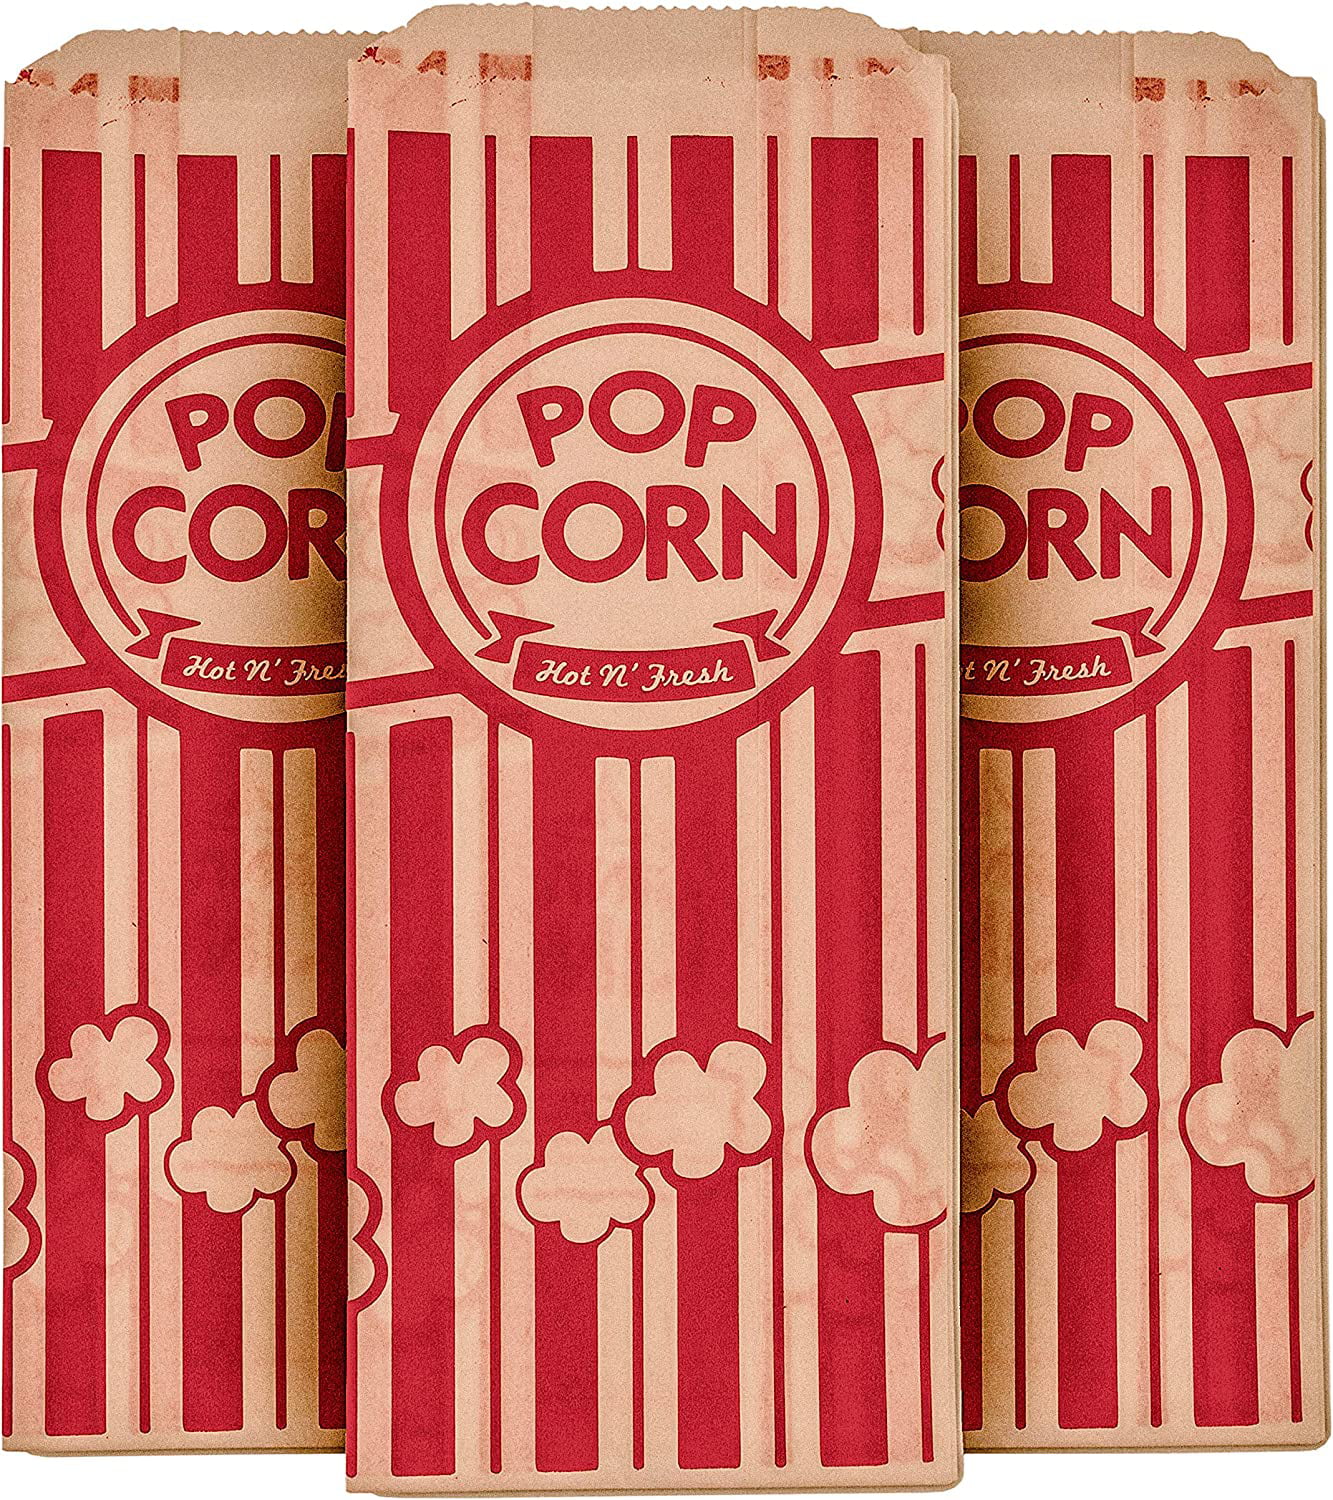 Carnival King Paper Popcorn Bags RedWhite 100 Count Pack of 1  Popcorn  bags Mail gifts Carnival themed party